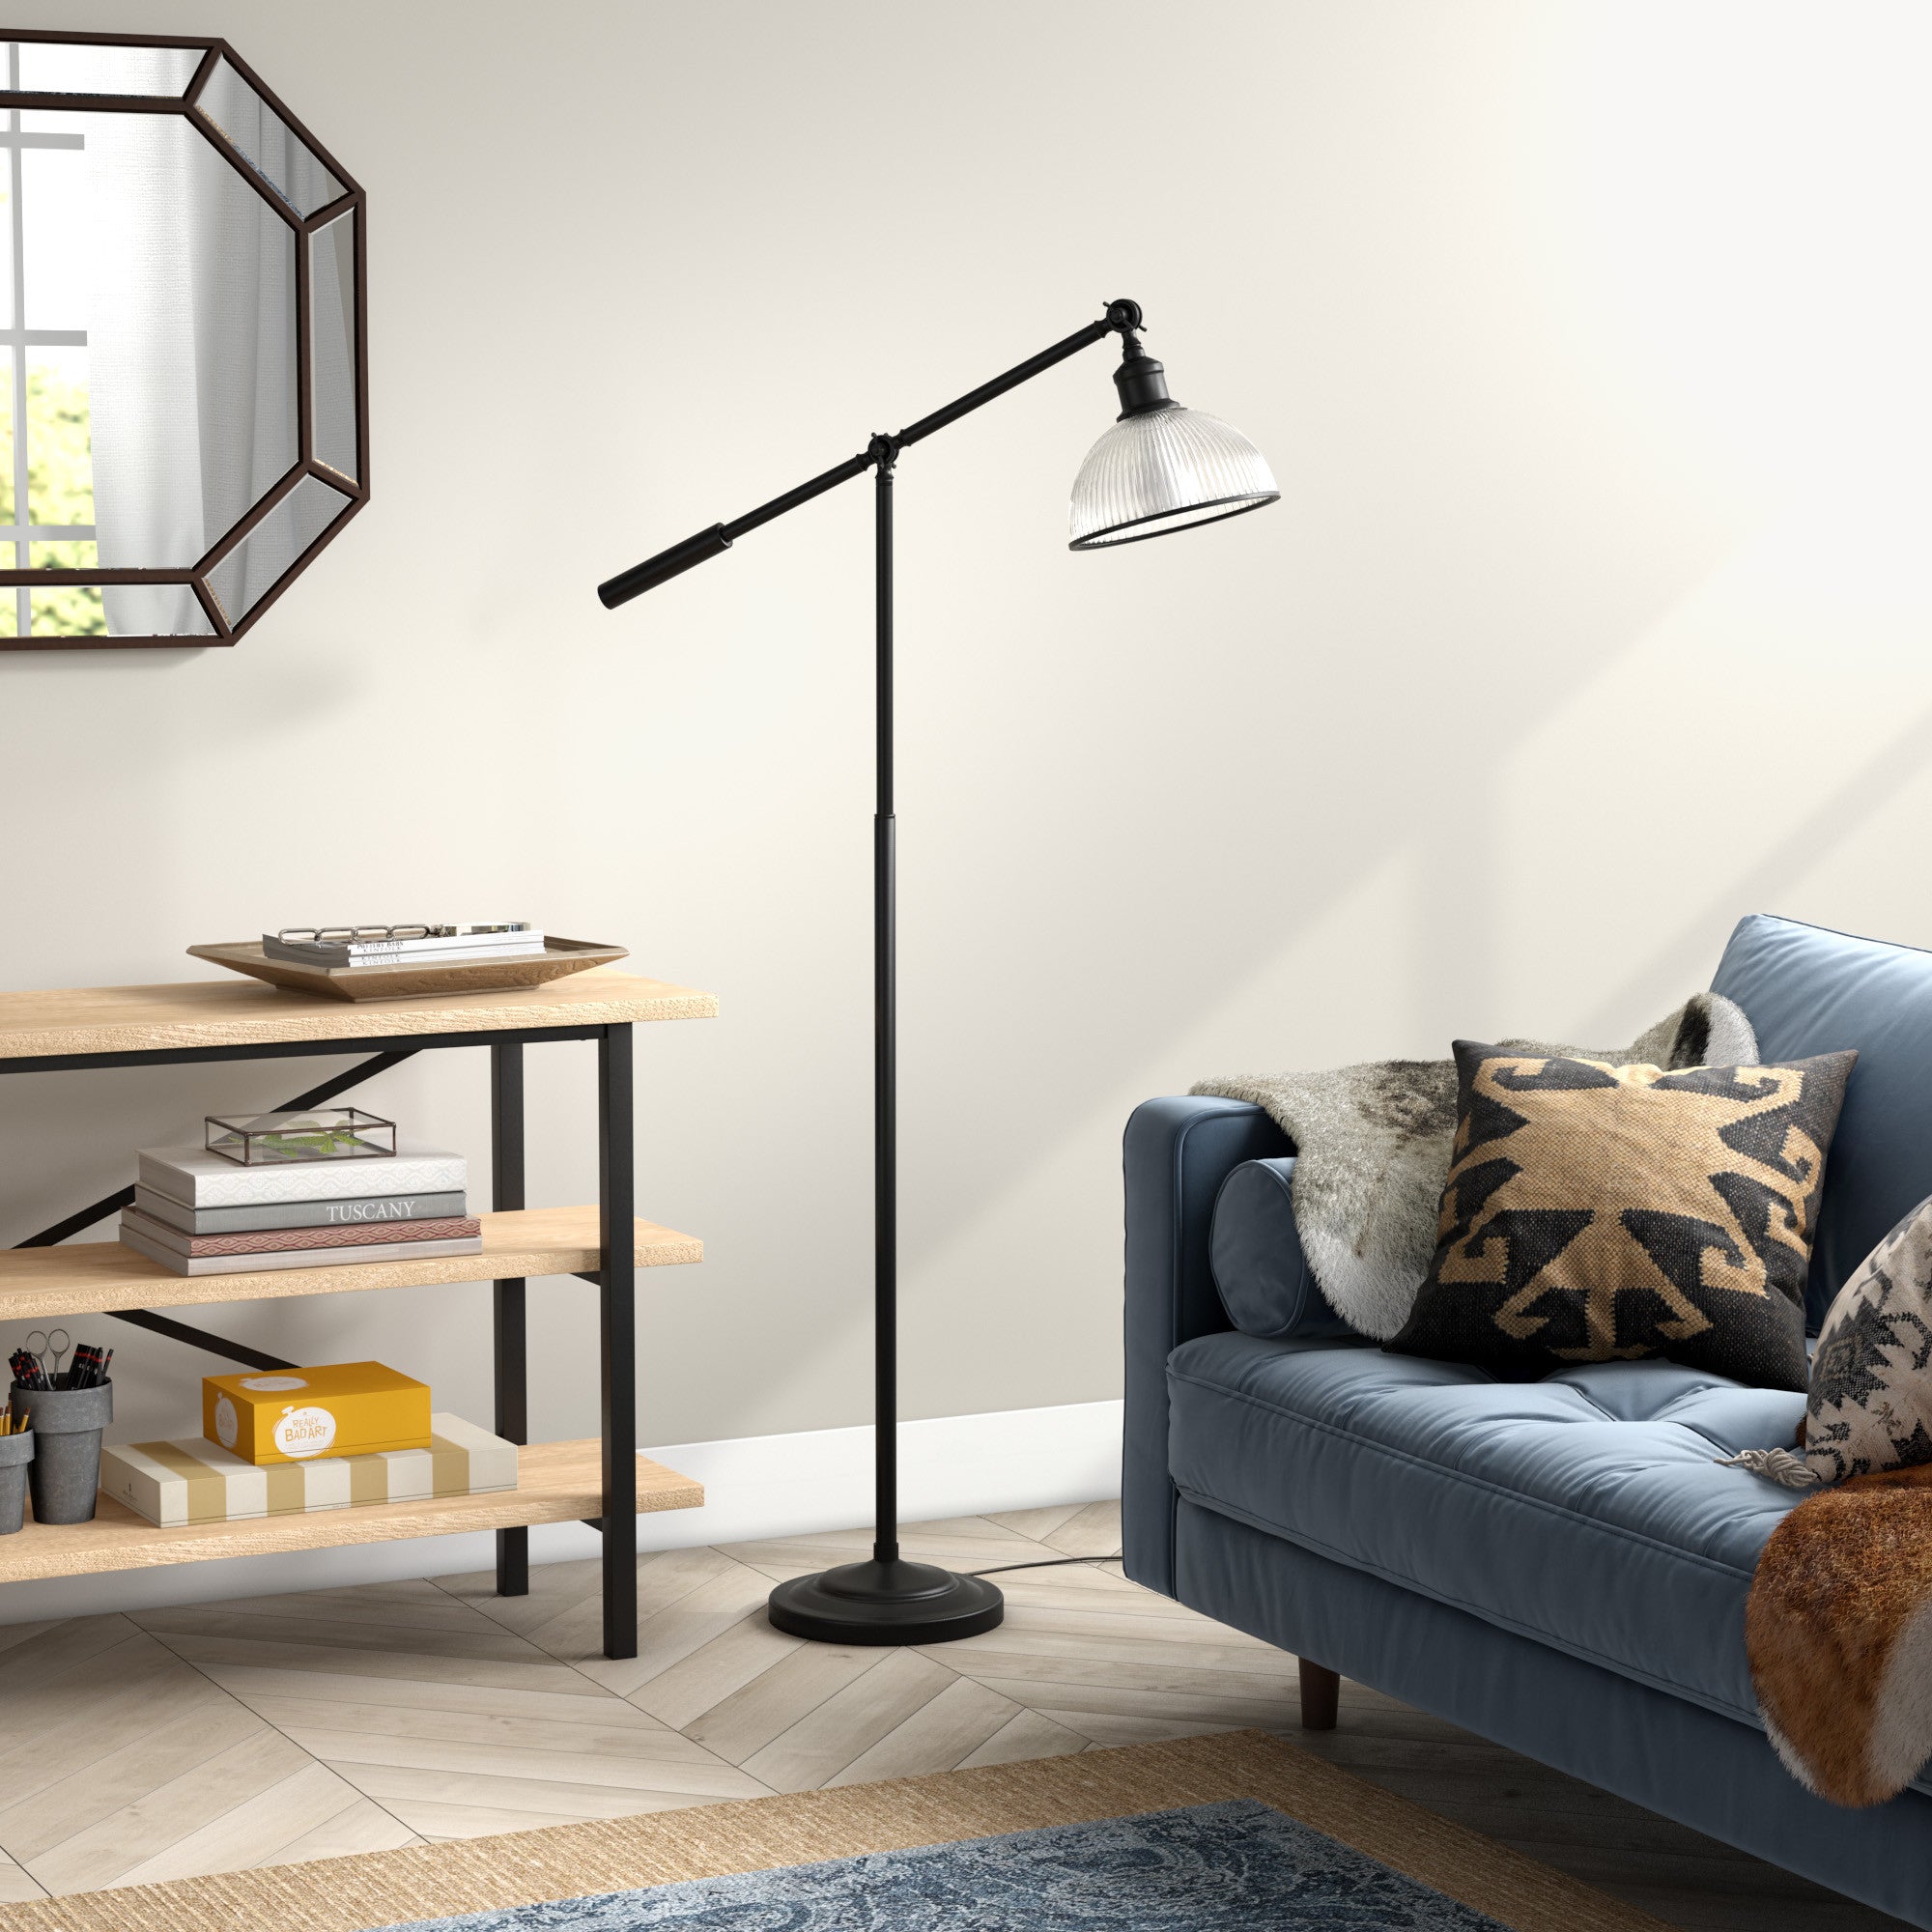 58" Black Swing Arm Floor Lamp With Clear Transparent Glass Dome Shade